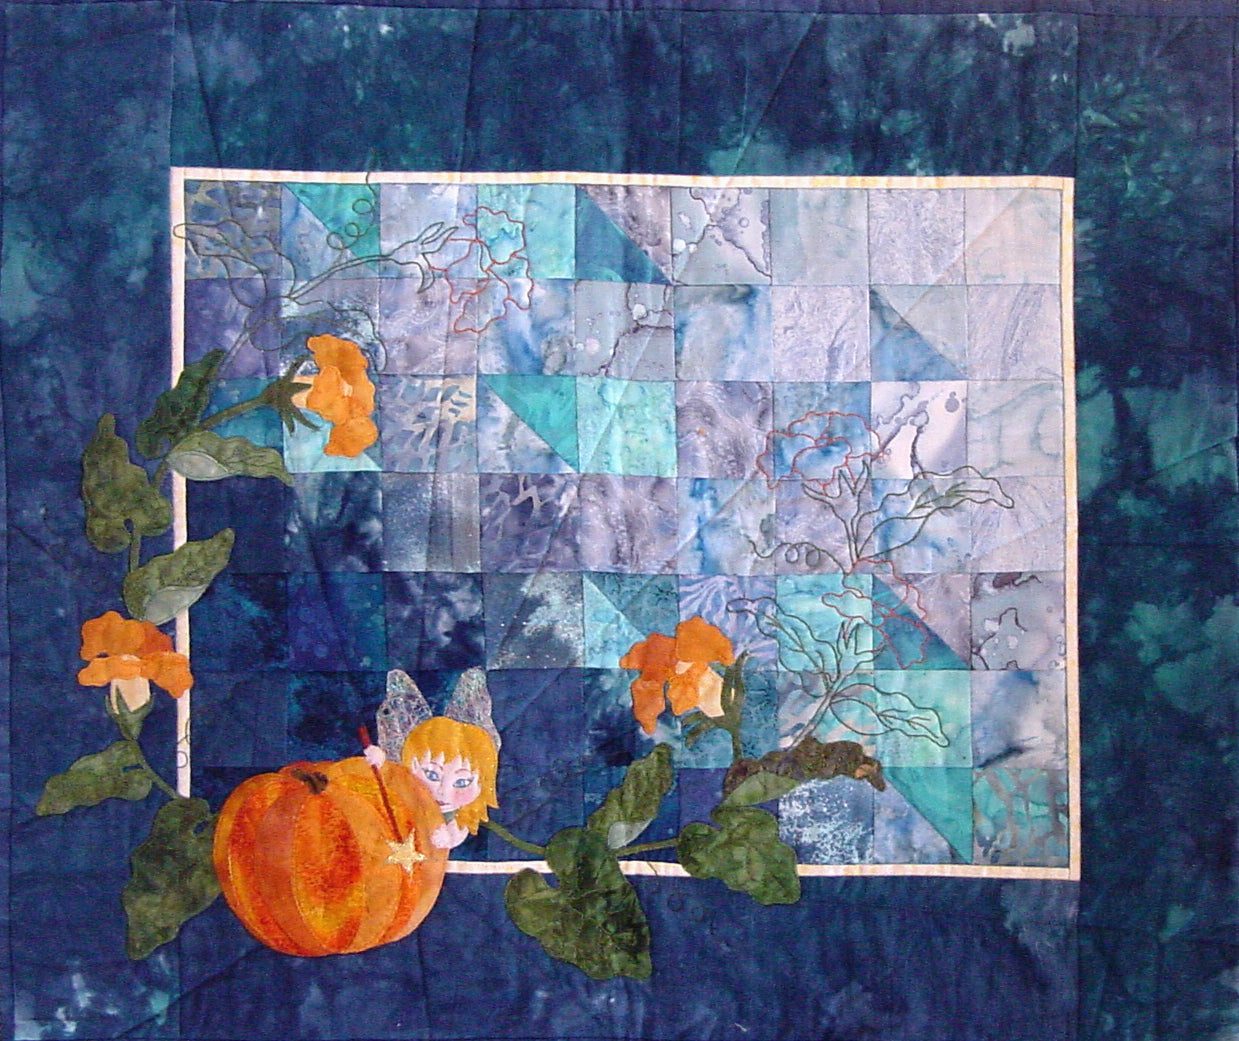 applique is used to create a pumpkin vine, pumpkin, and fairy on a color wash patchwork background of this quilt